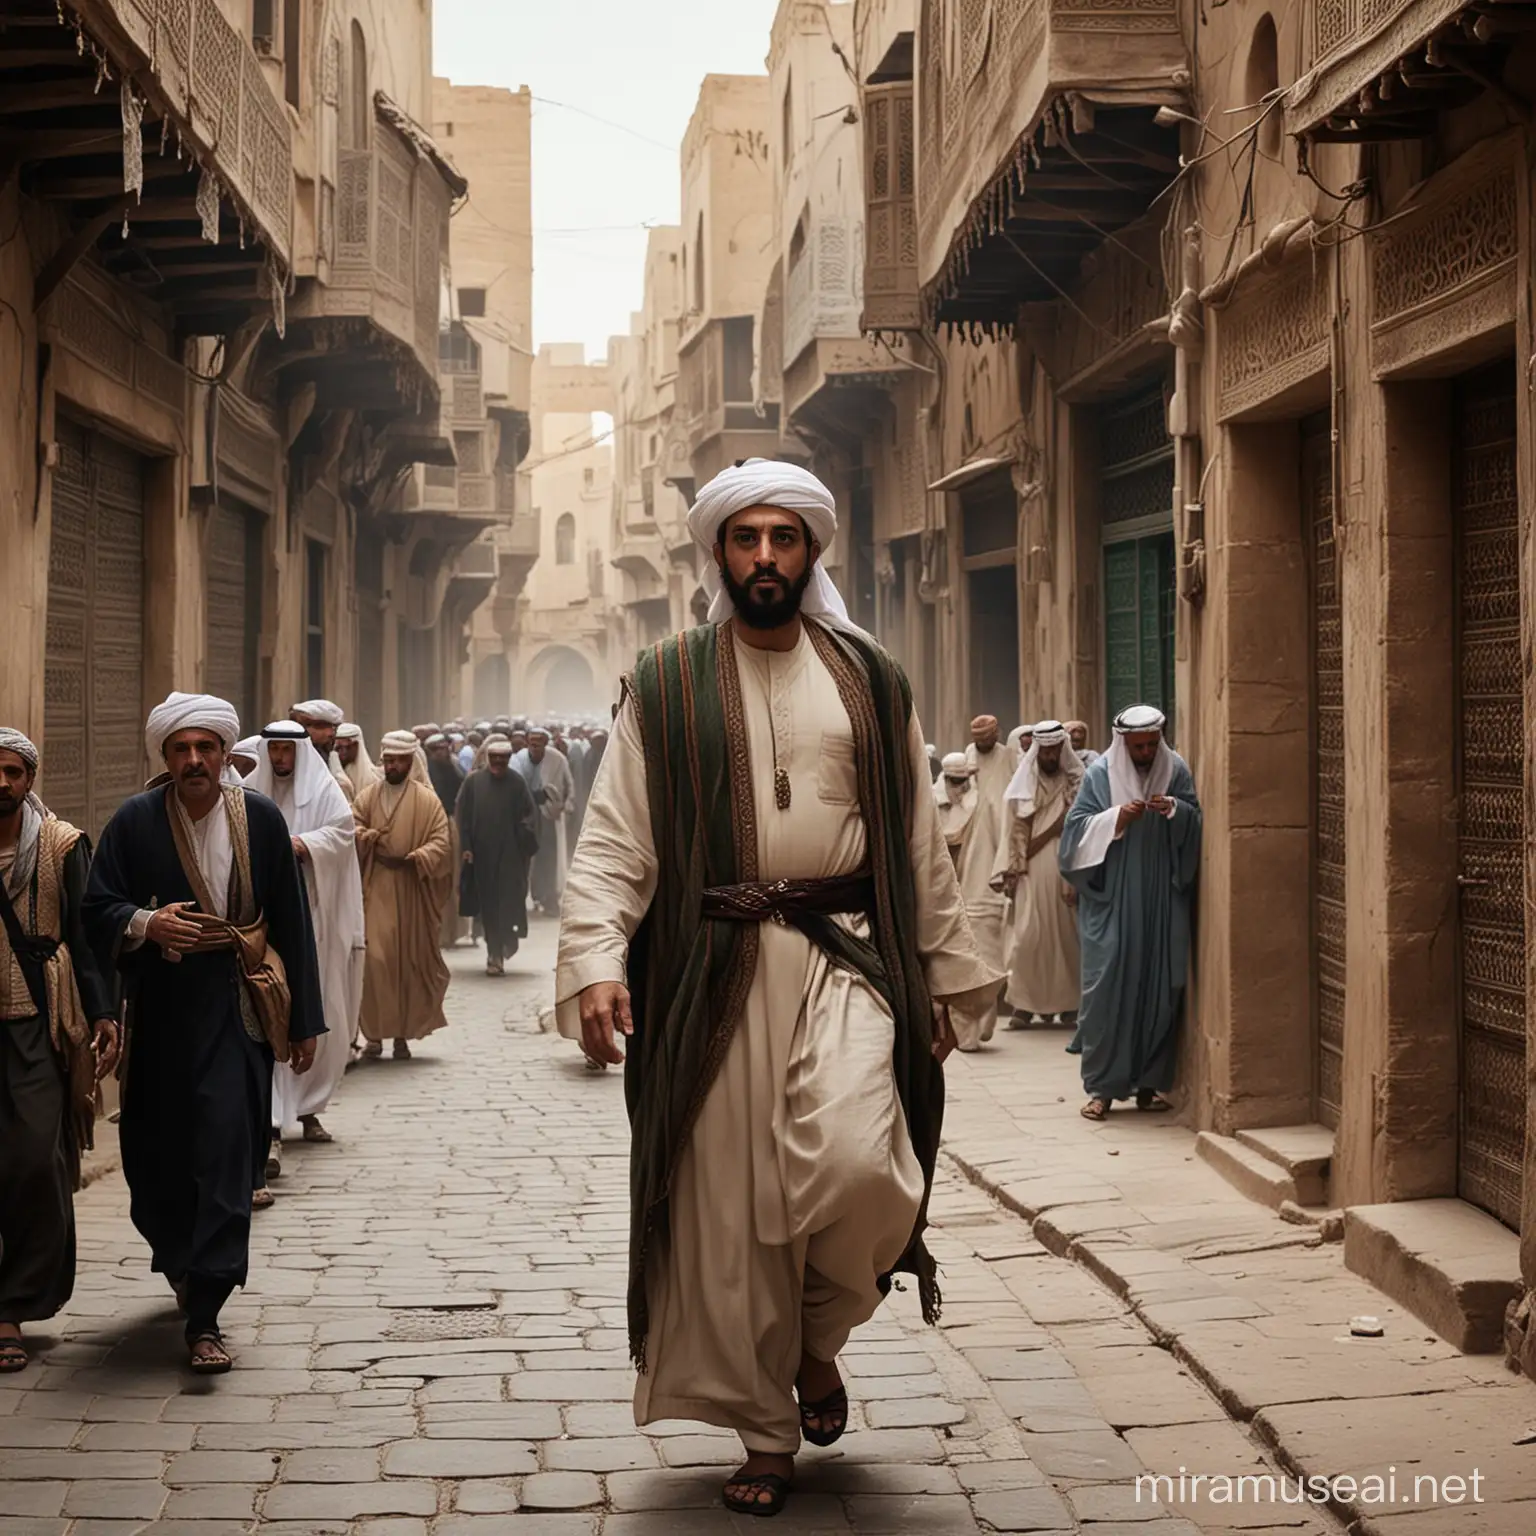 Compose an evocative scene featuring Hajjaj bin Yusuf, the influential Umayyad governor, amidst the bustling streets of ancient Medina. Describe the atmosphere, his demeanor, and the interactions with the people around him. Capture the essence of his power, ambition, or any conflicting emotions that may be present